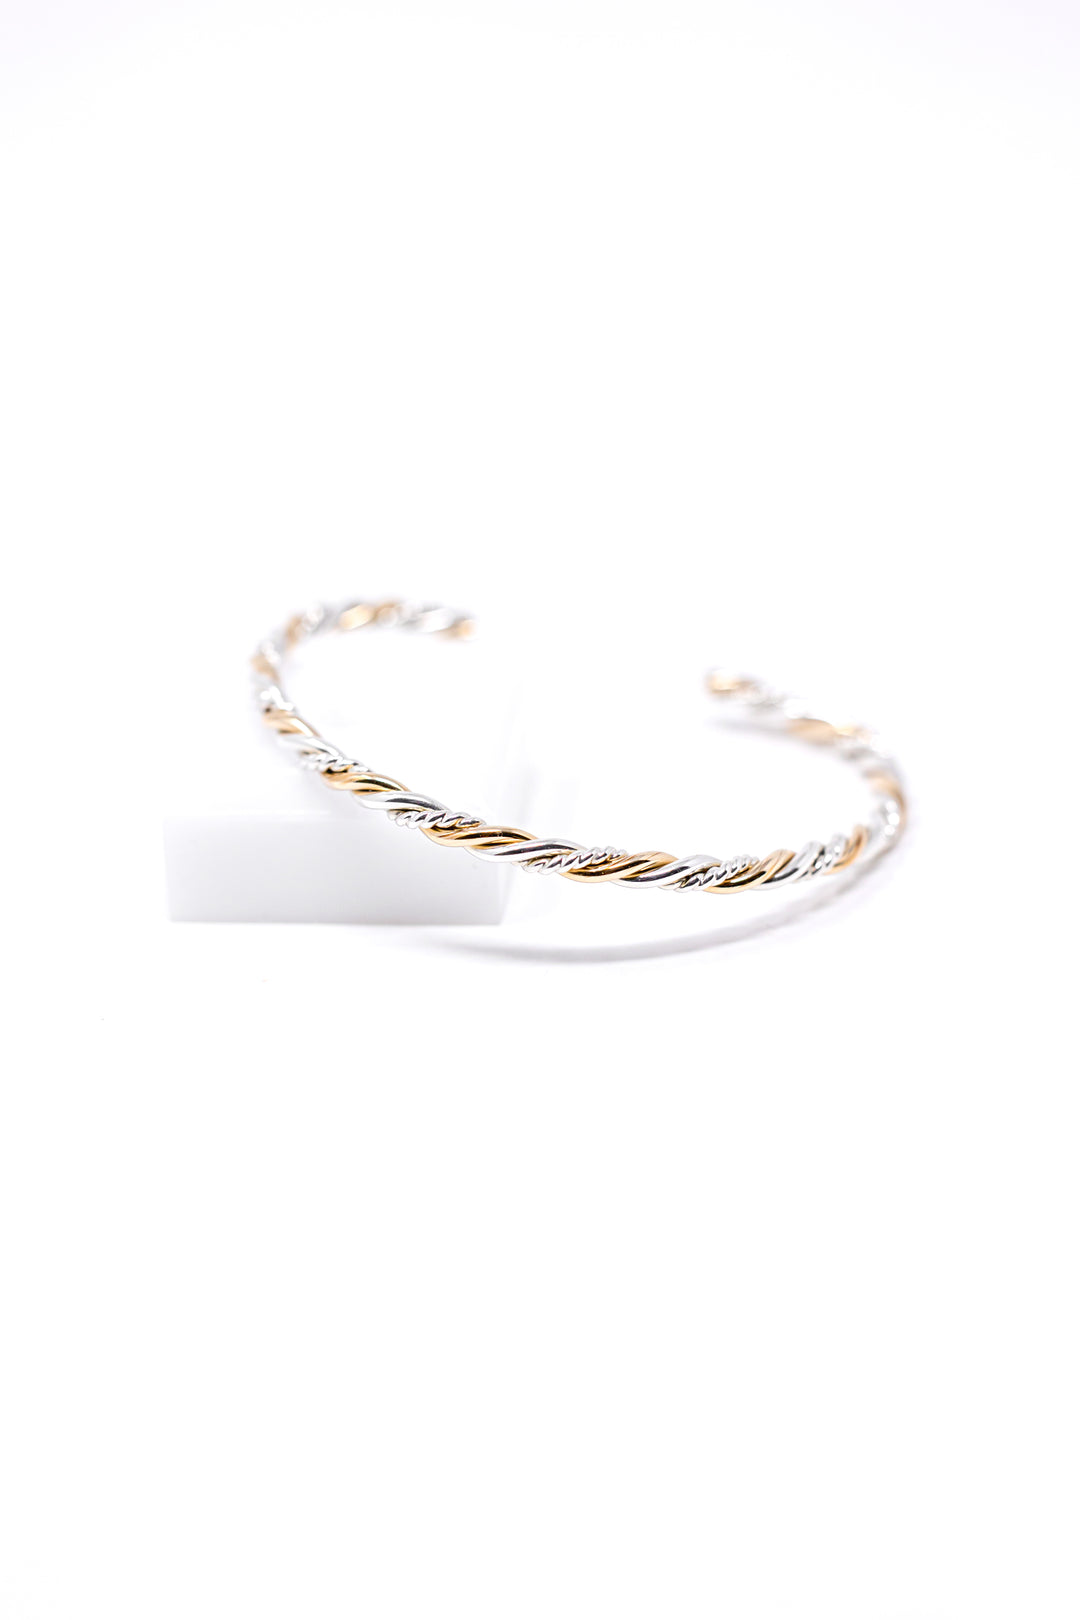 Braided Trifecta Bangle Cuff Bracelet (Gold and Silver)